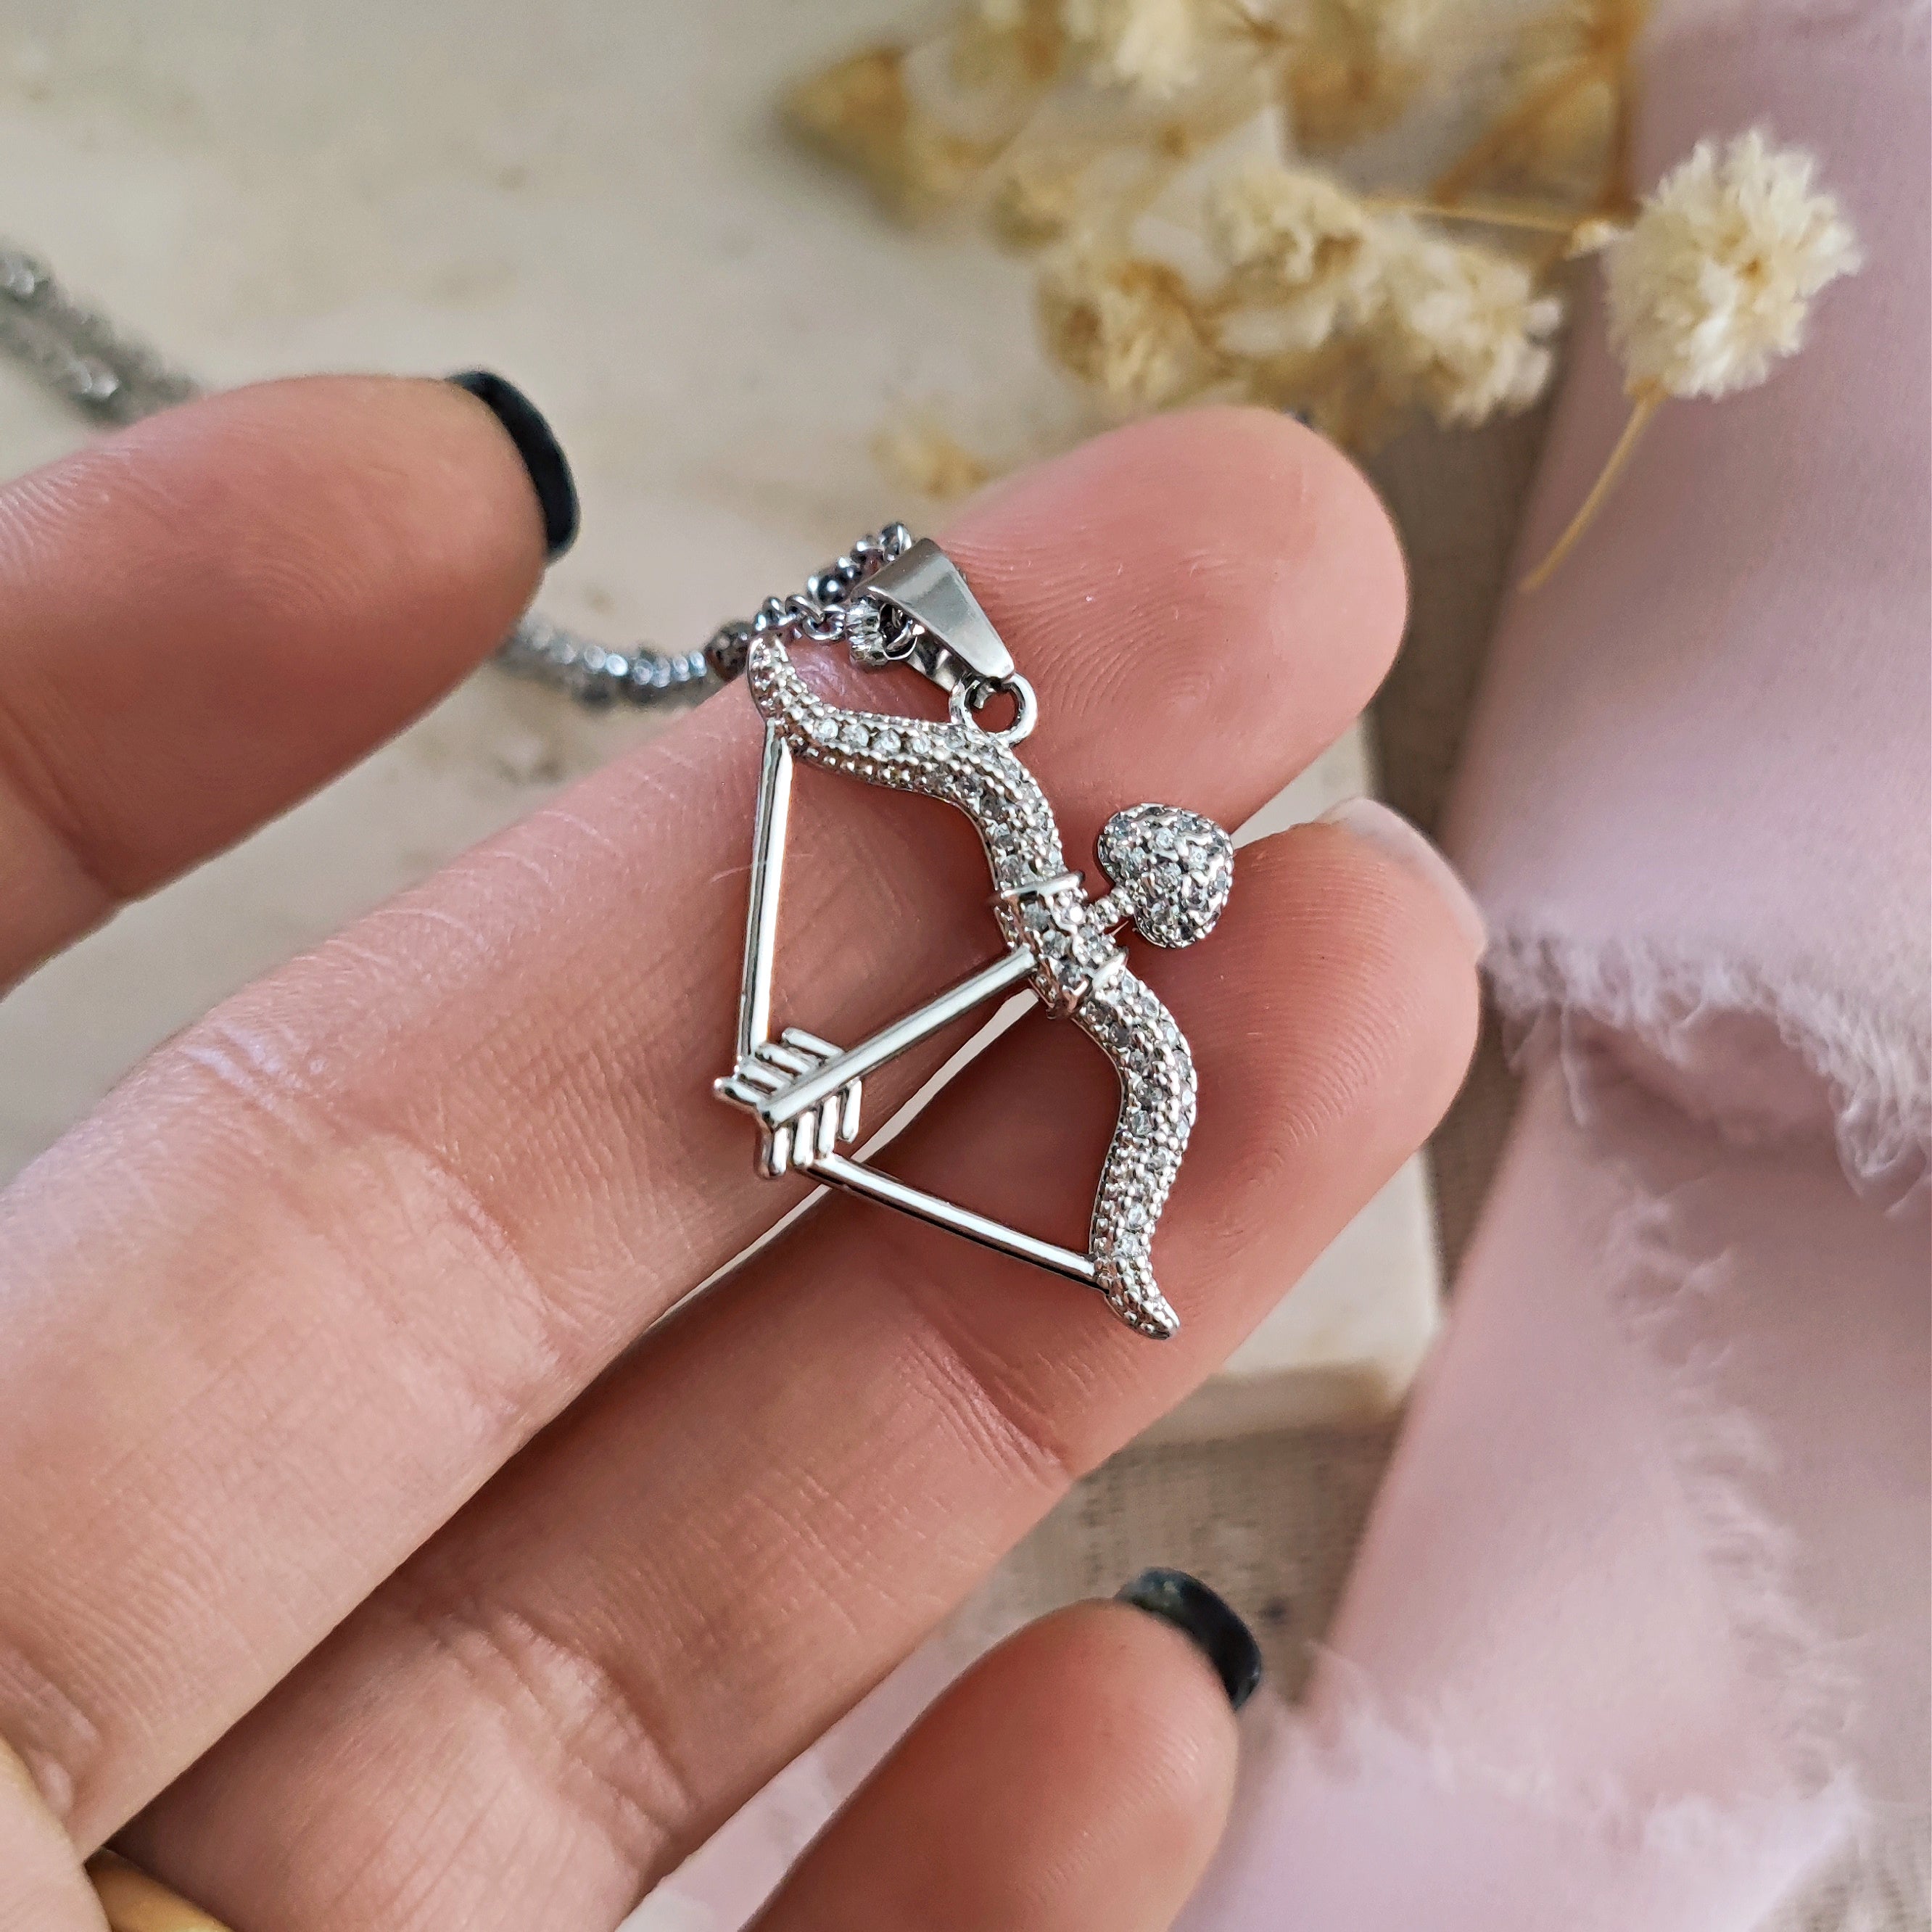 Arrows in Jewelry: Decoding Their Symbolism and Significance